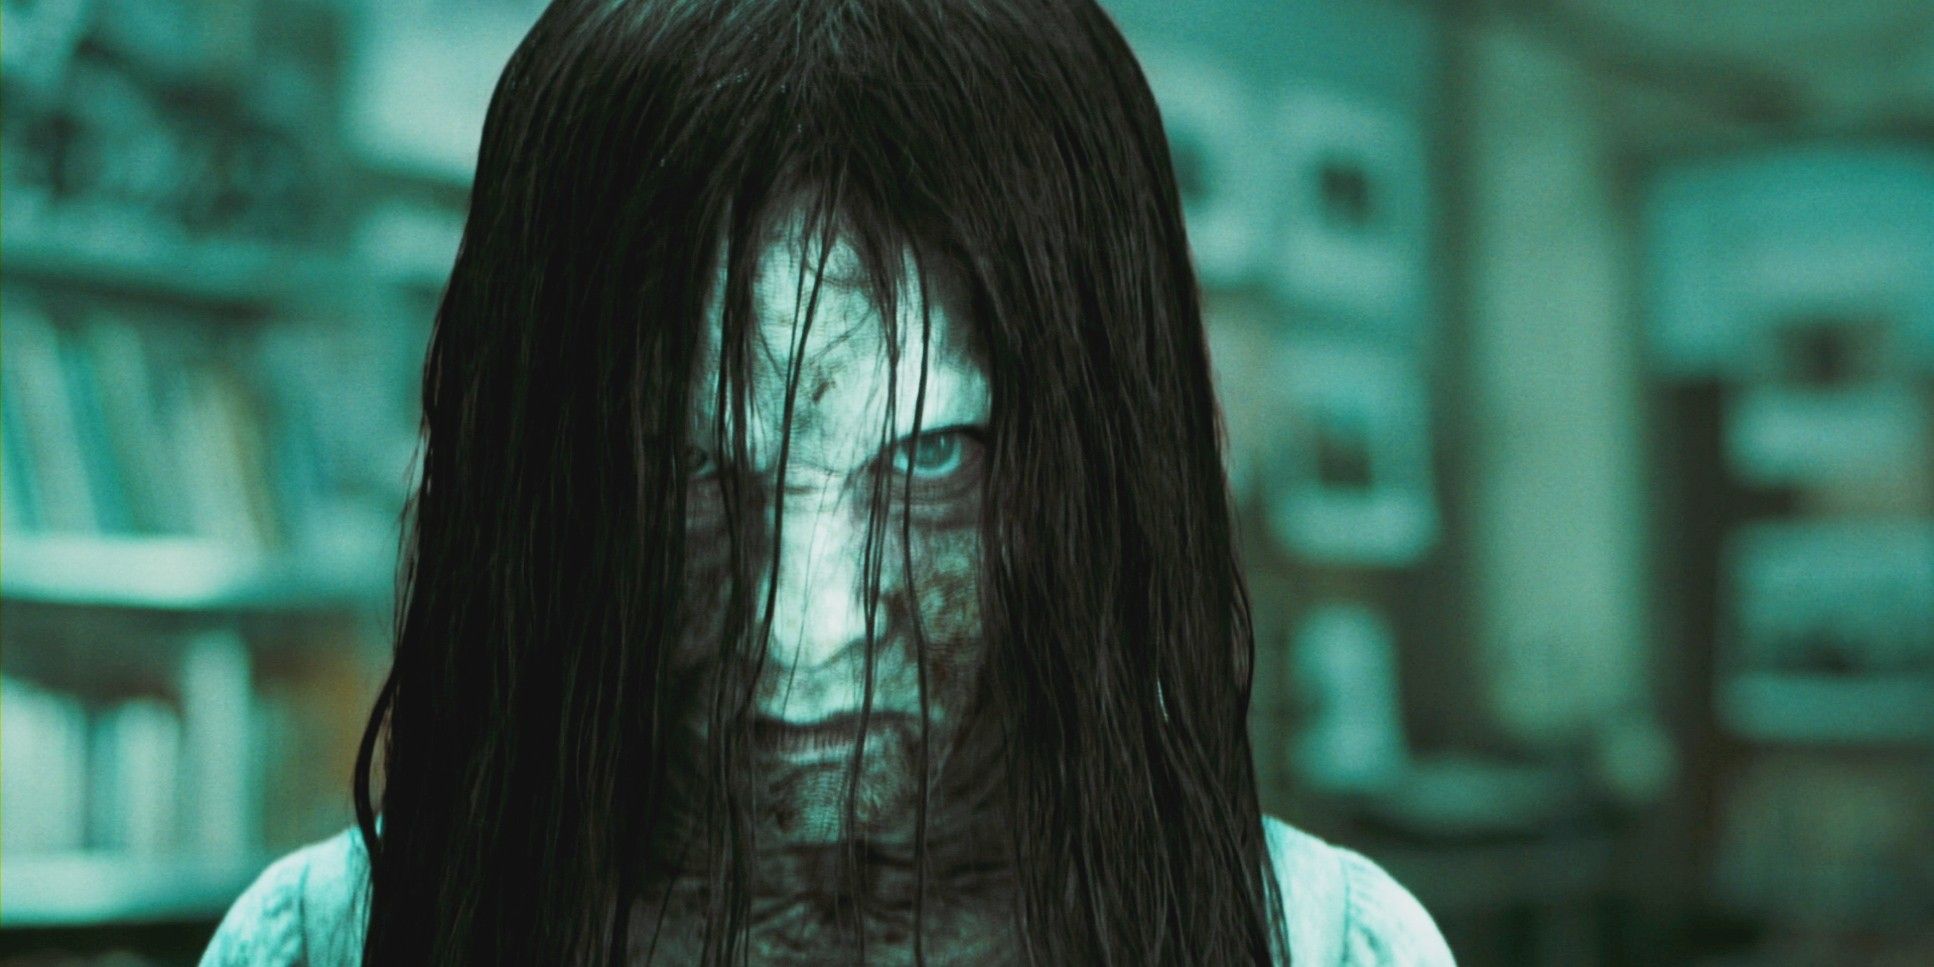 A close-up of Samara in the 2002 The Ring movie